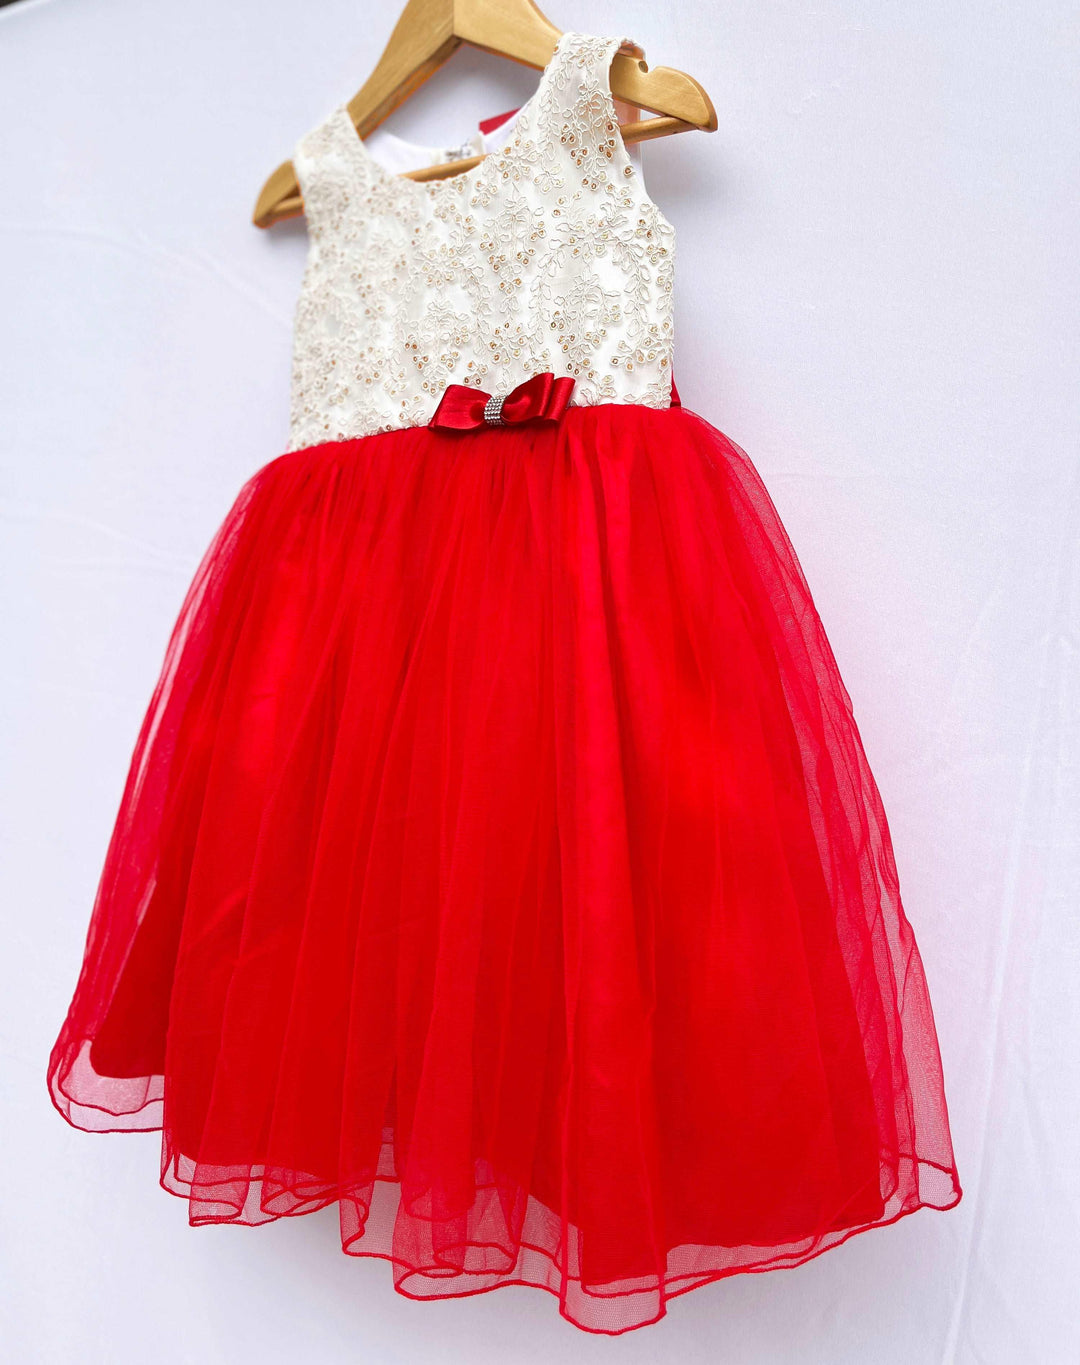 Red & Cream Combo Knee length Frock
Fabric: Red and Cream shade mono net with premium golden threadwork detailing on the yoke portion  Beautifully designed outfit for Baby girls with smooth lining for